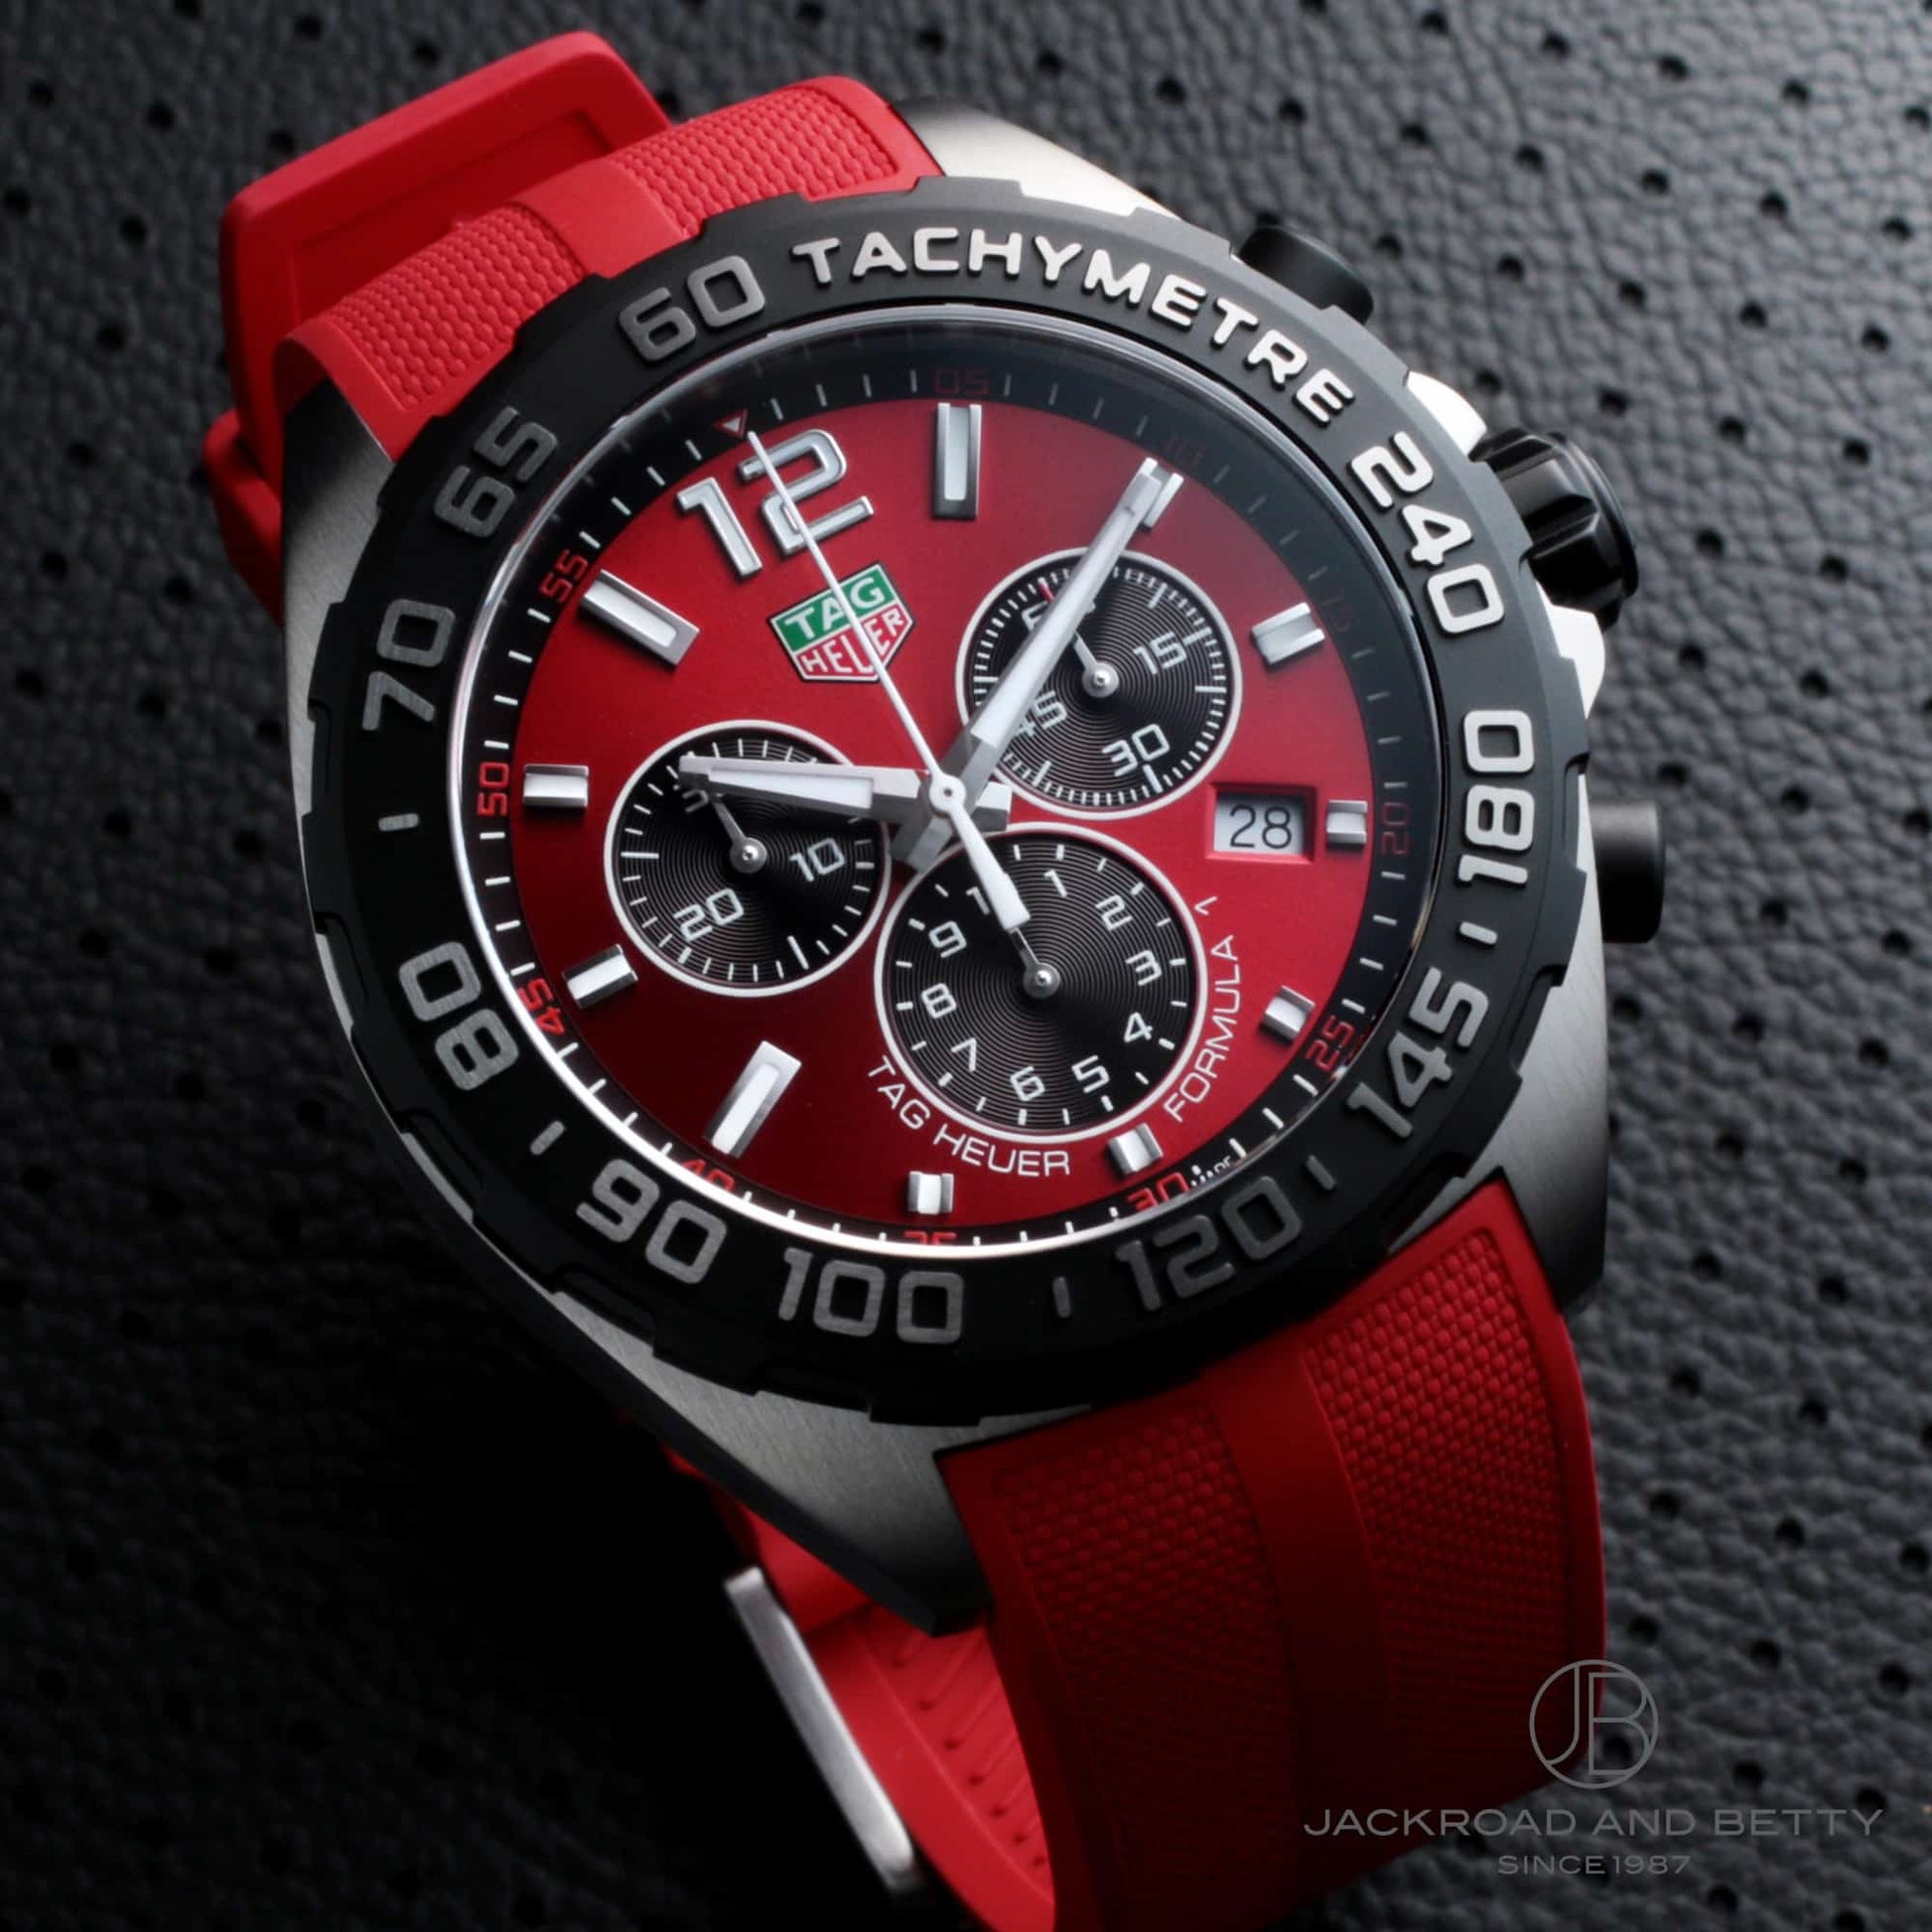 Tag Heuer Formula 1 Chronograph Red Dial Red Rubber Strap Watch for Men - CAZ101AN.FT8055